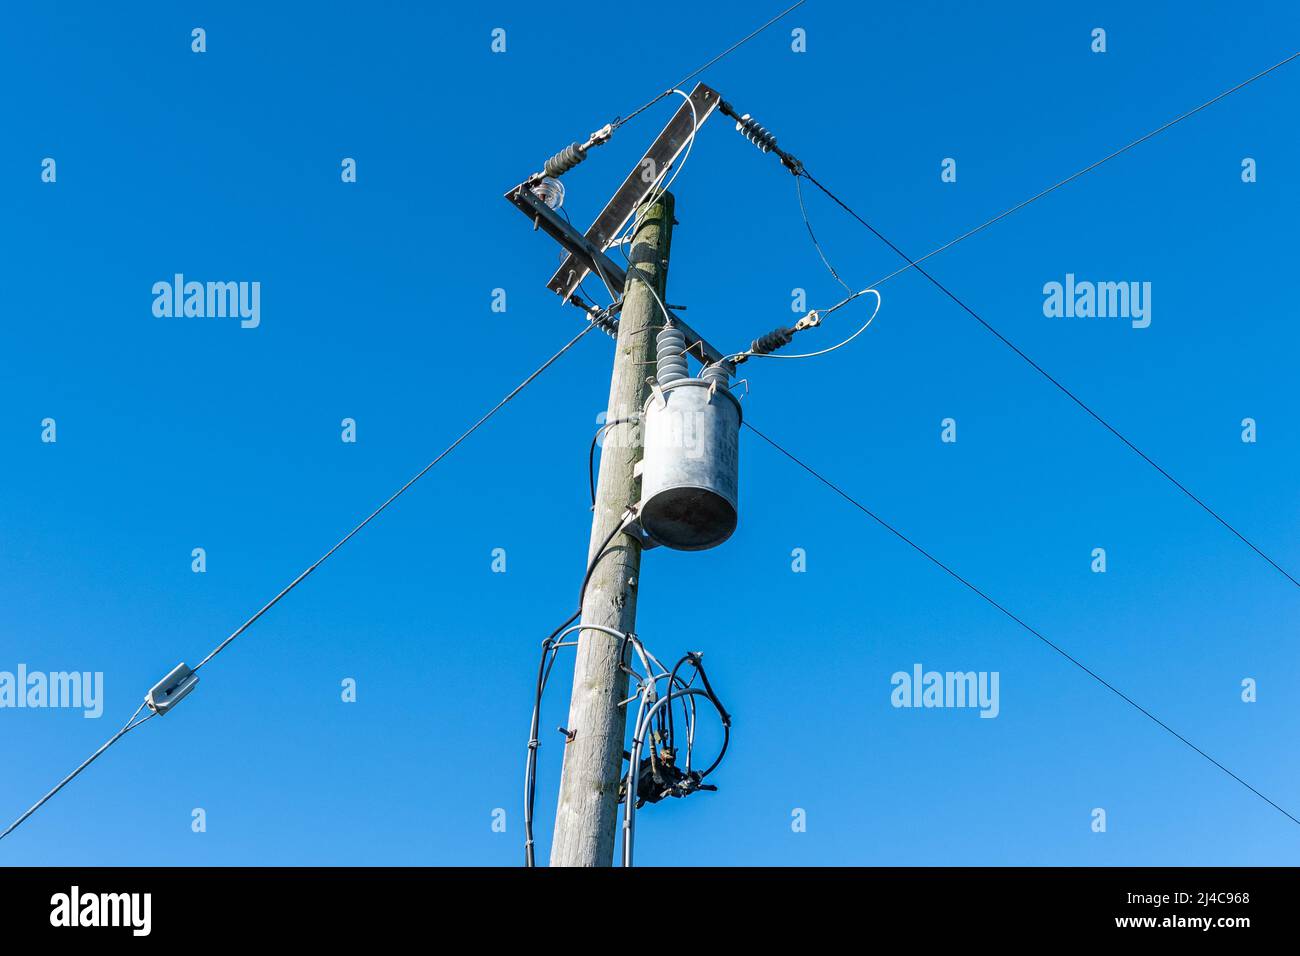 Close up of ESB electricity pole and cables in Ireland. Stock Photo